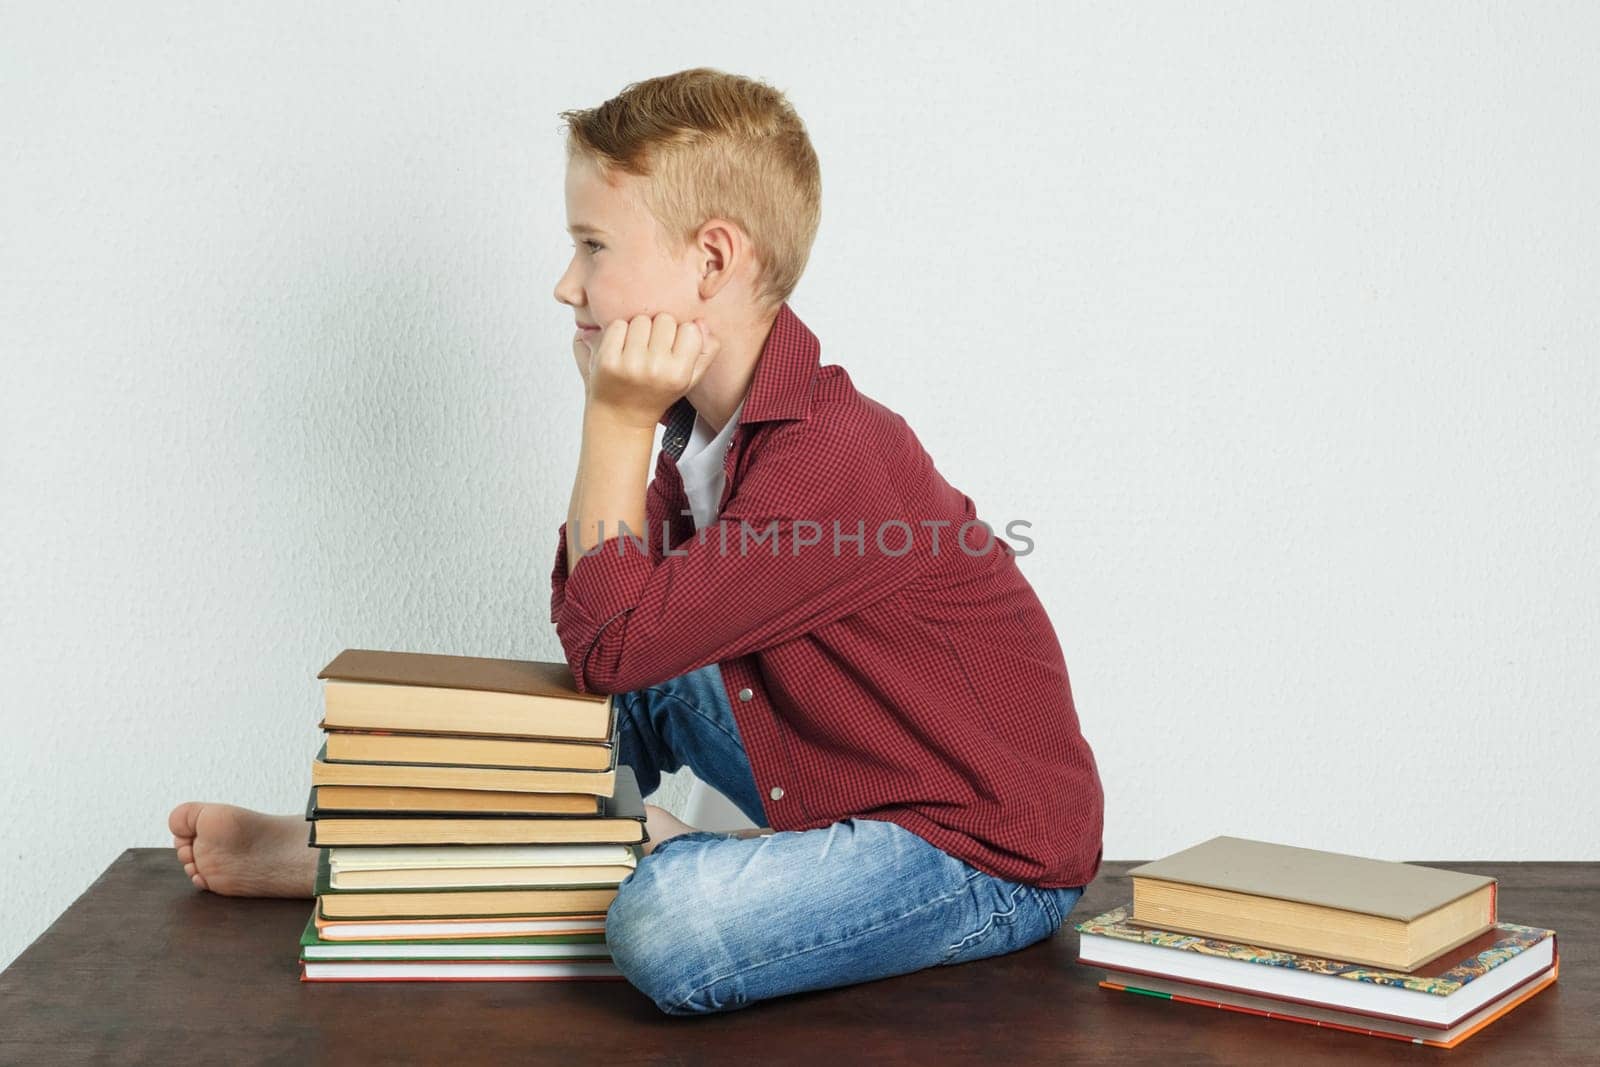 A schoolboy sits on the table near the books, resting his elbows on them and looking away. by Sd28DimoN_1976